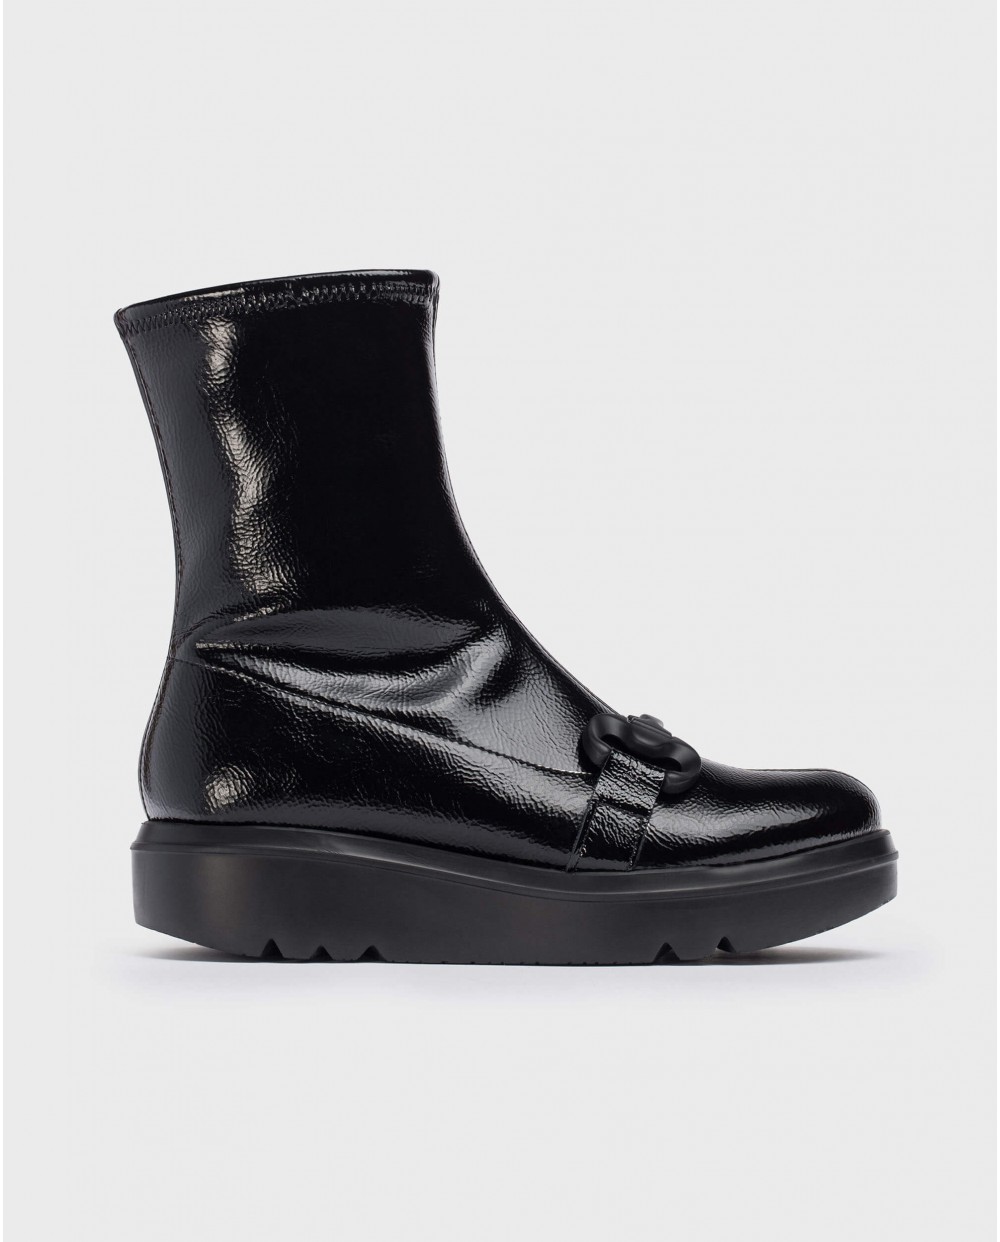 Wonders-Ankle Boots-Black CHICAGO ankle boot